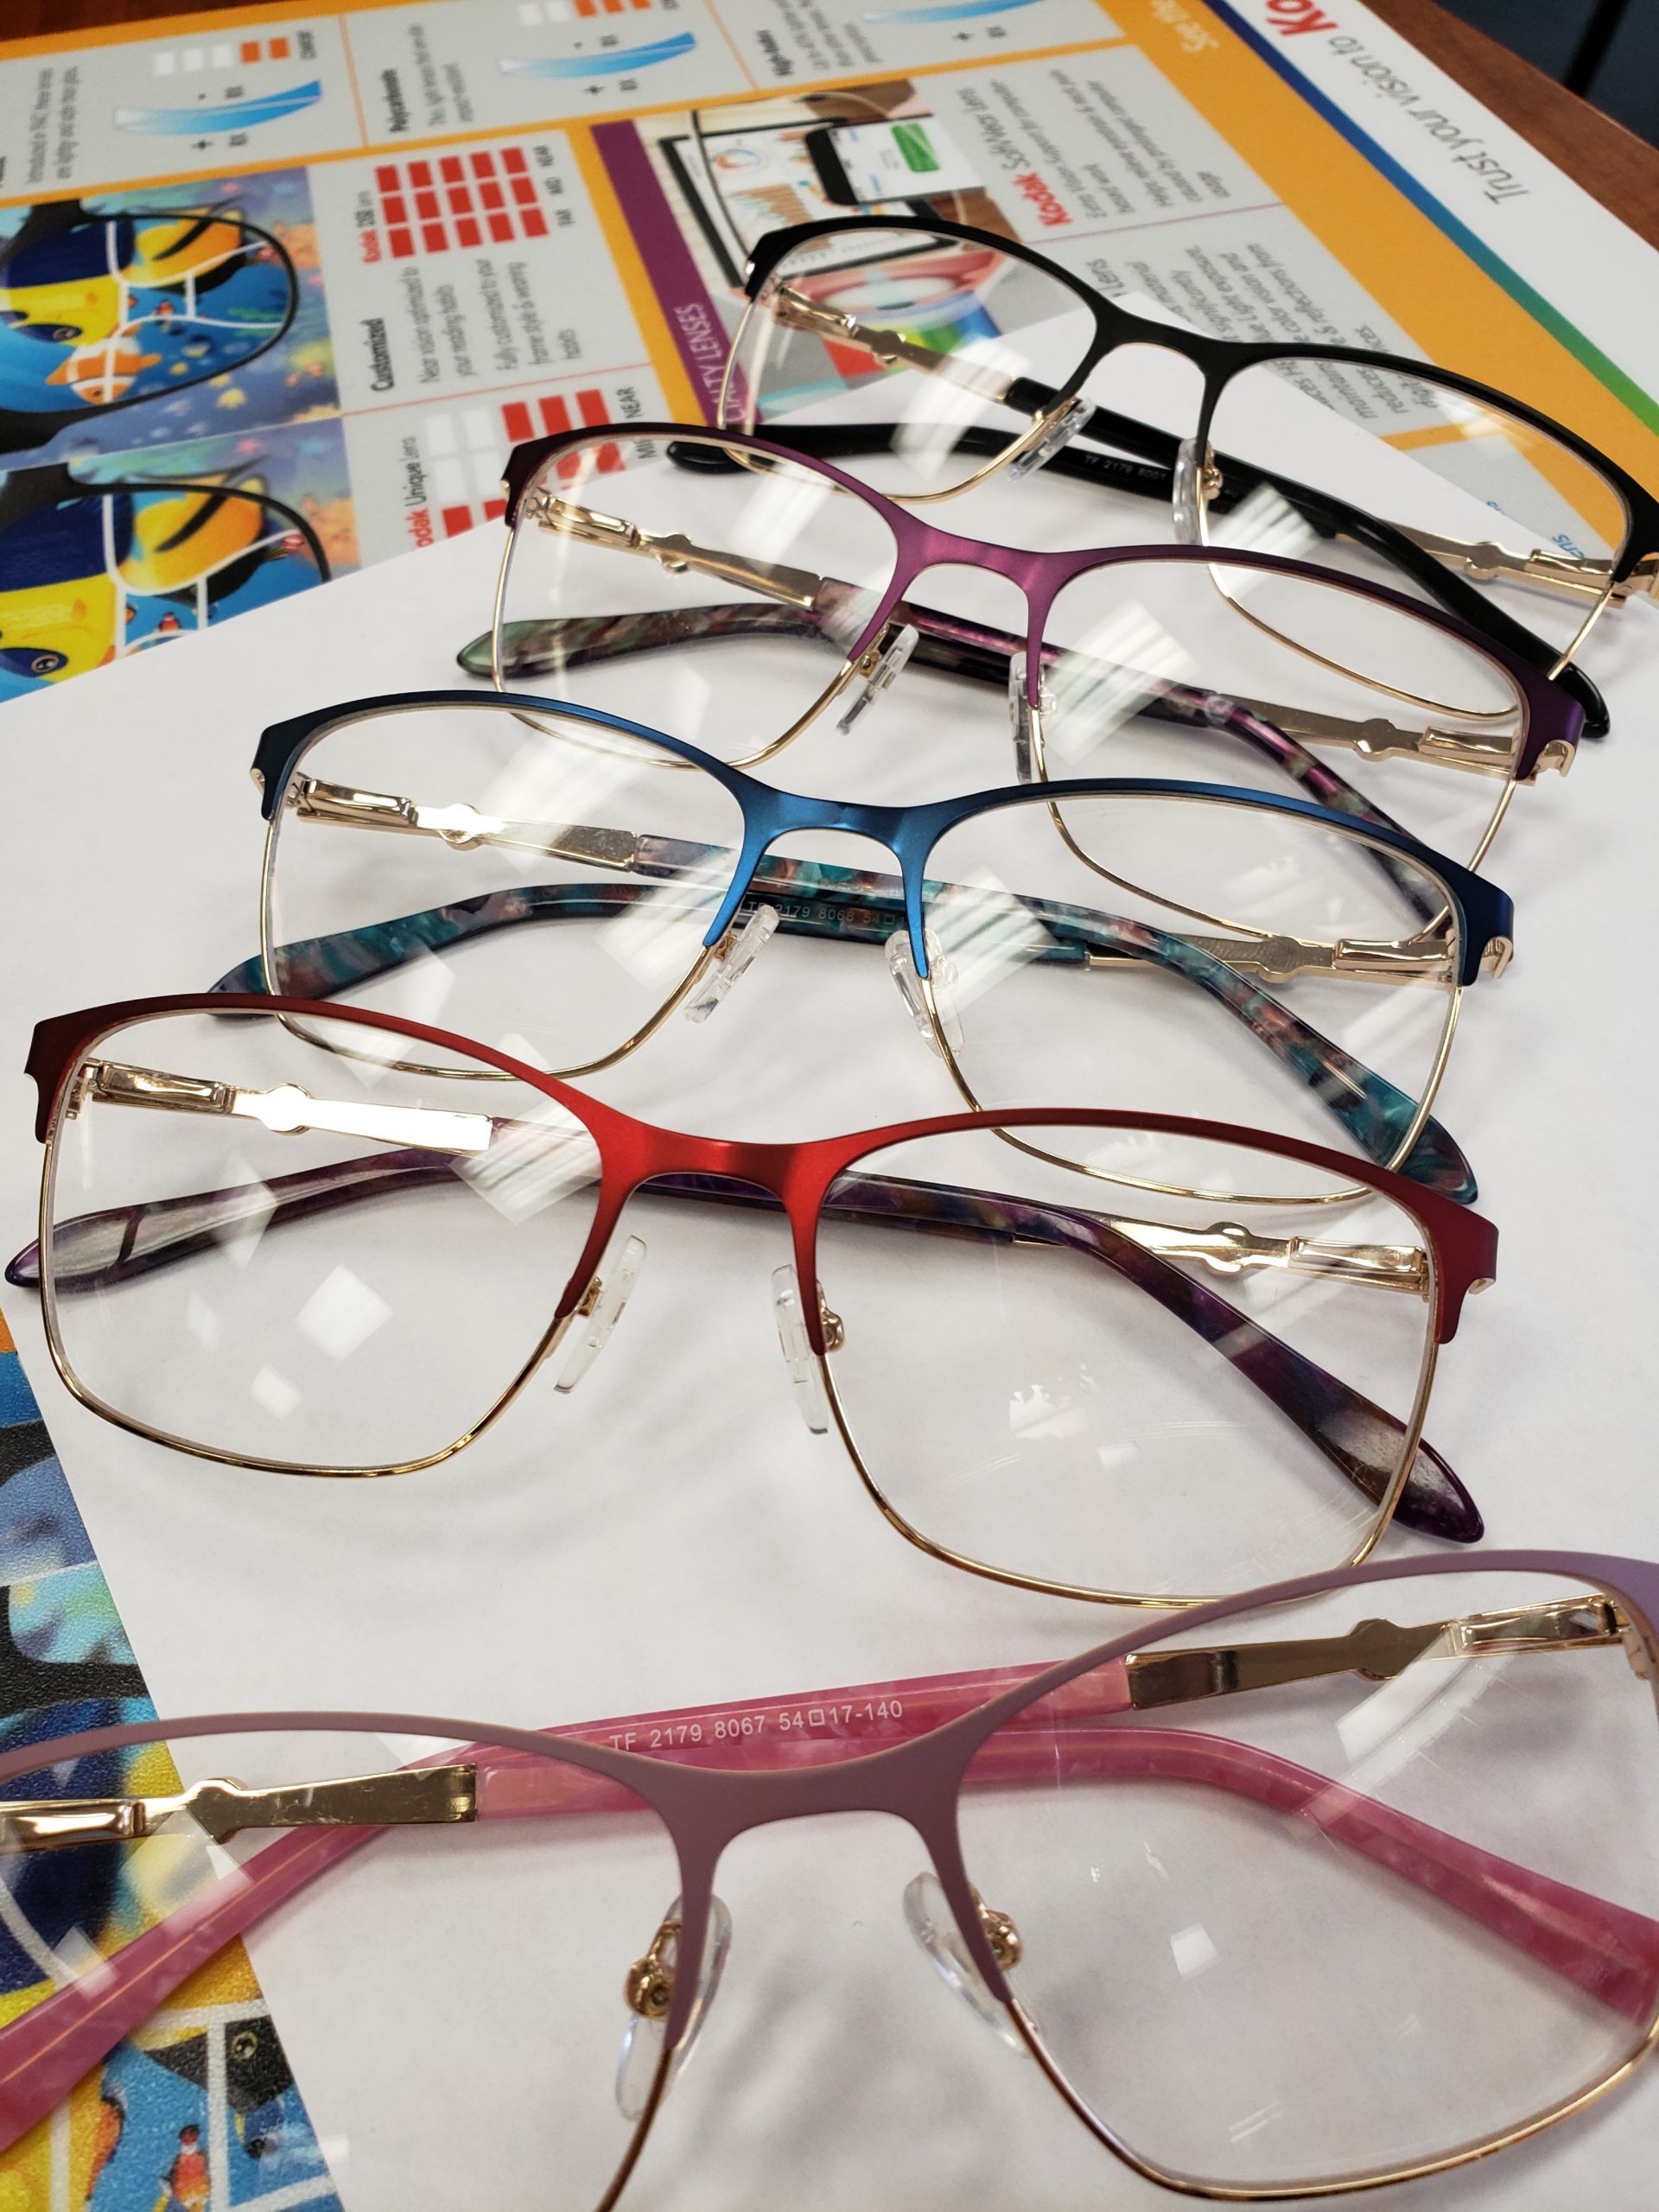 Multiple large frame glasses laid out on a row on a desk